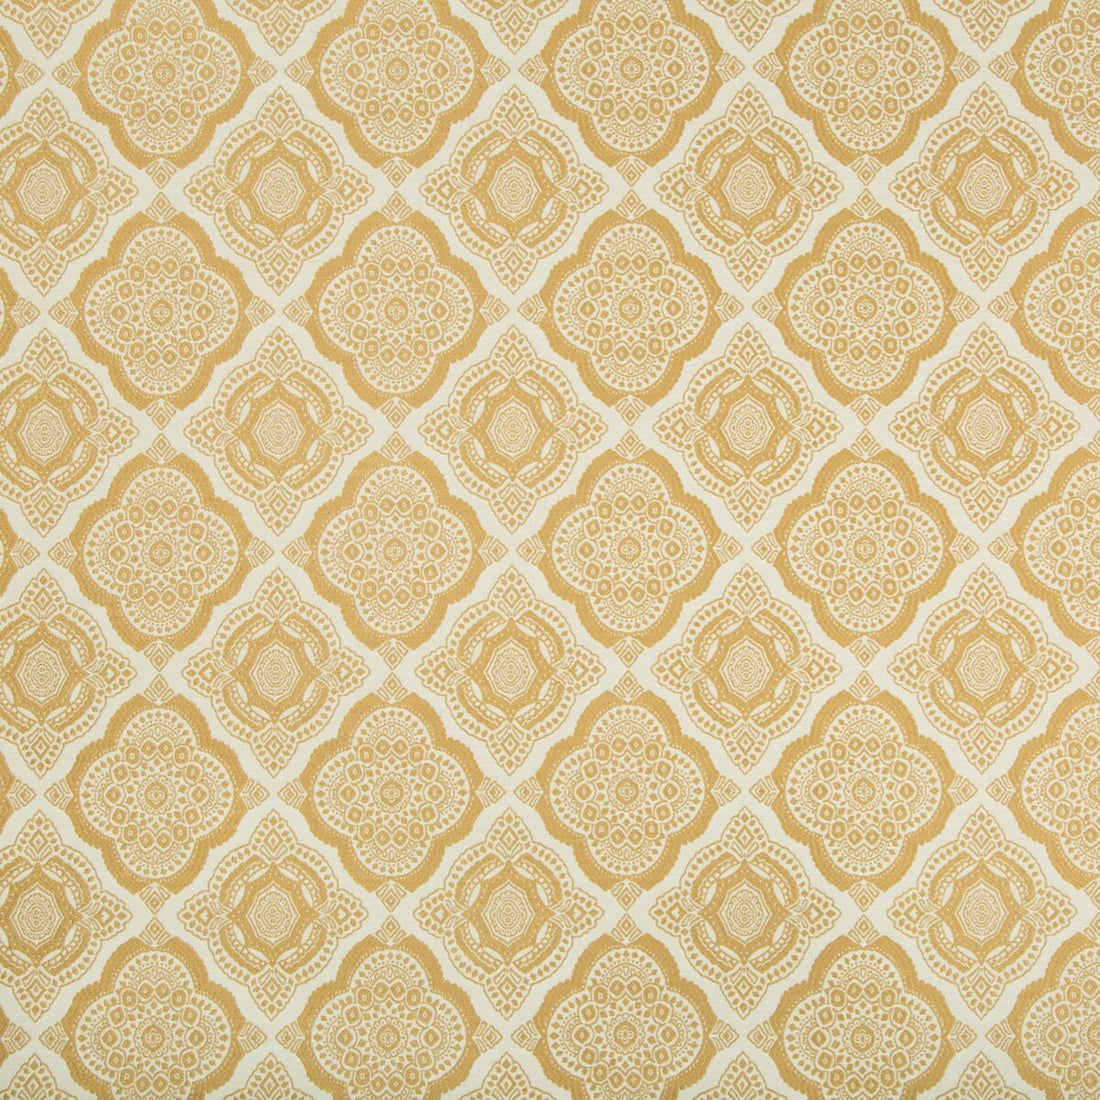 Kravet Contract fabric in 34742-16 color - pattern 34742.16.0 - by Kravet Contract in the Crypton Incase collection